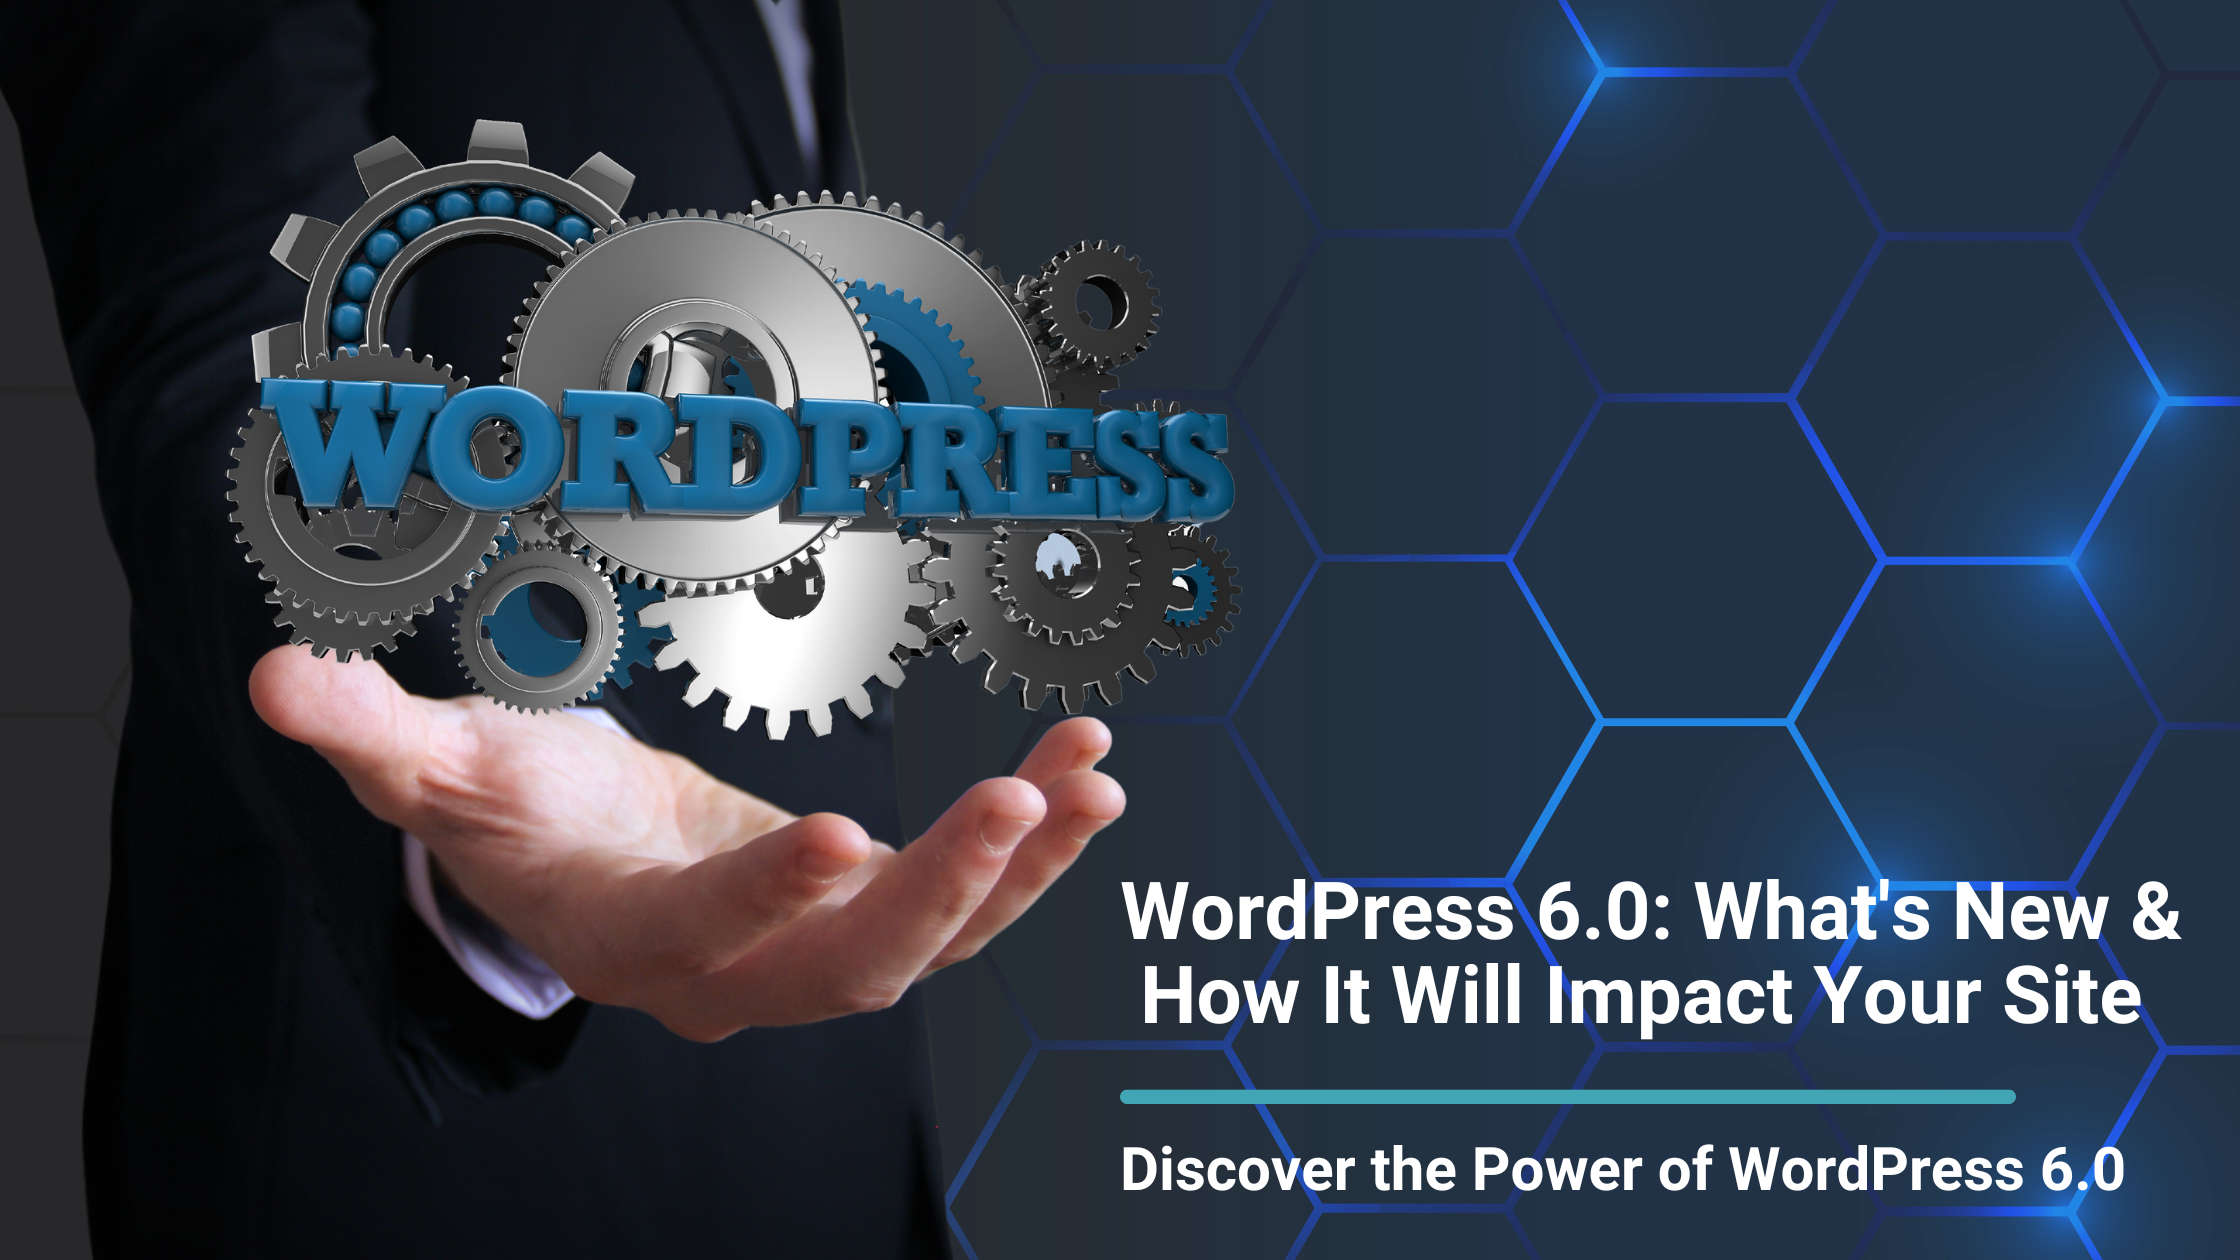 WordPress 6.0: What’s New and How It Will Impact Your Site